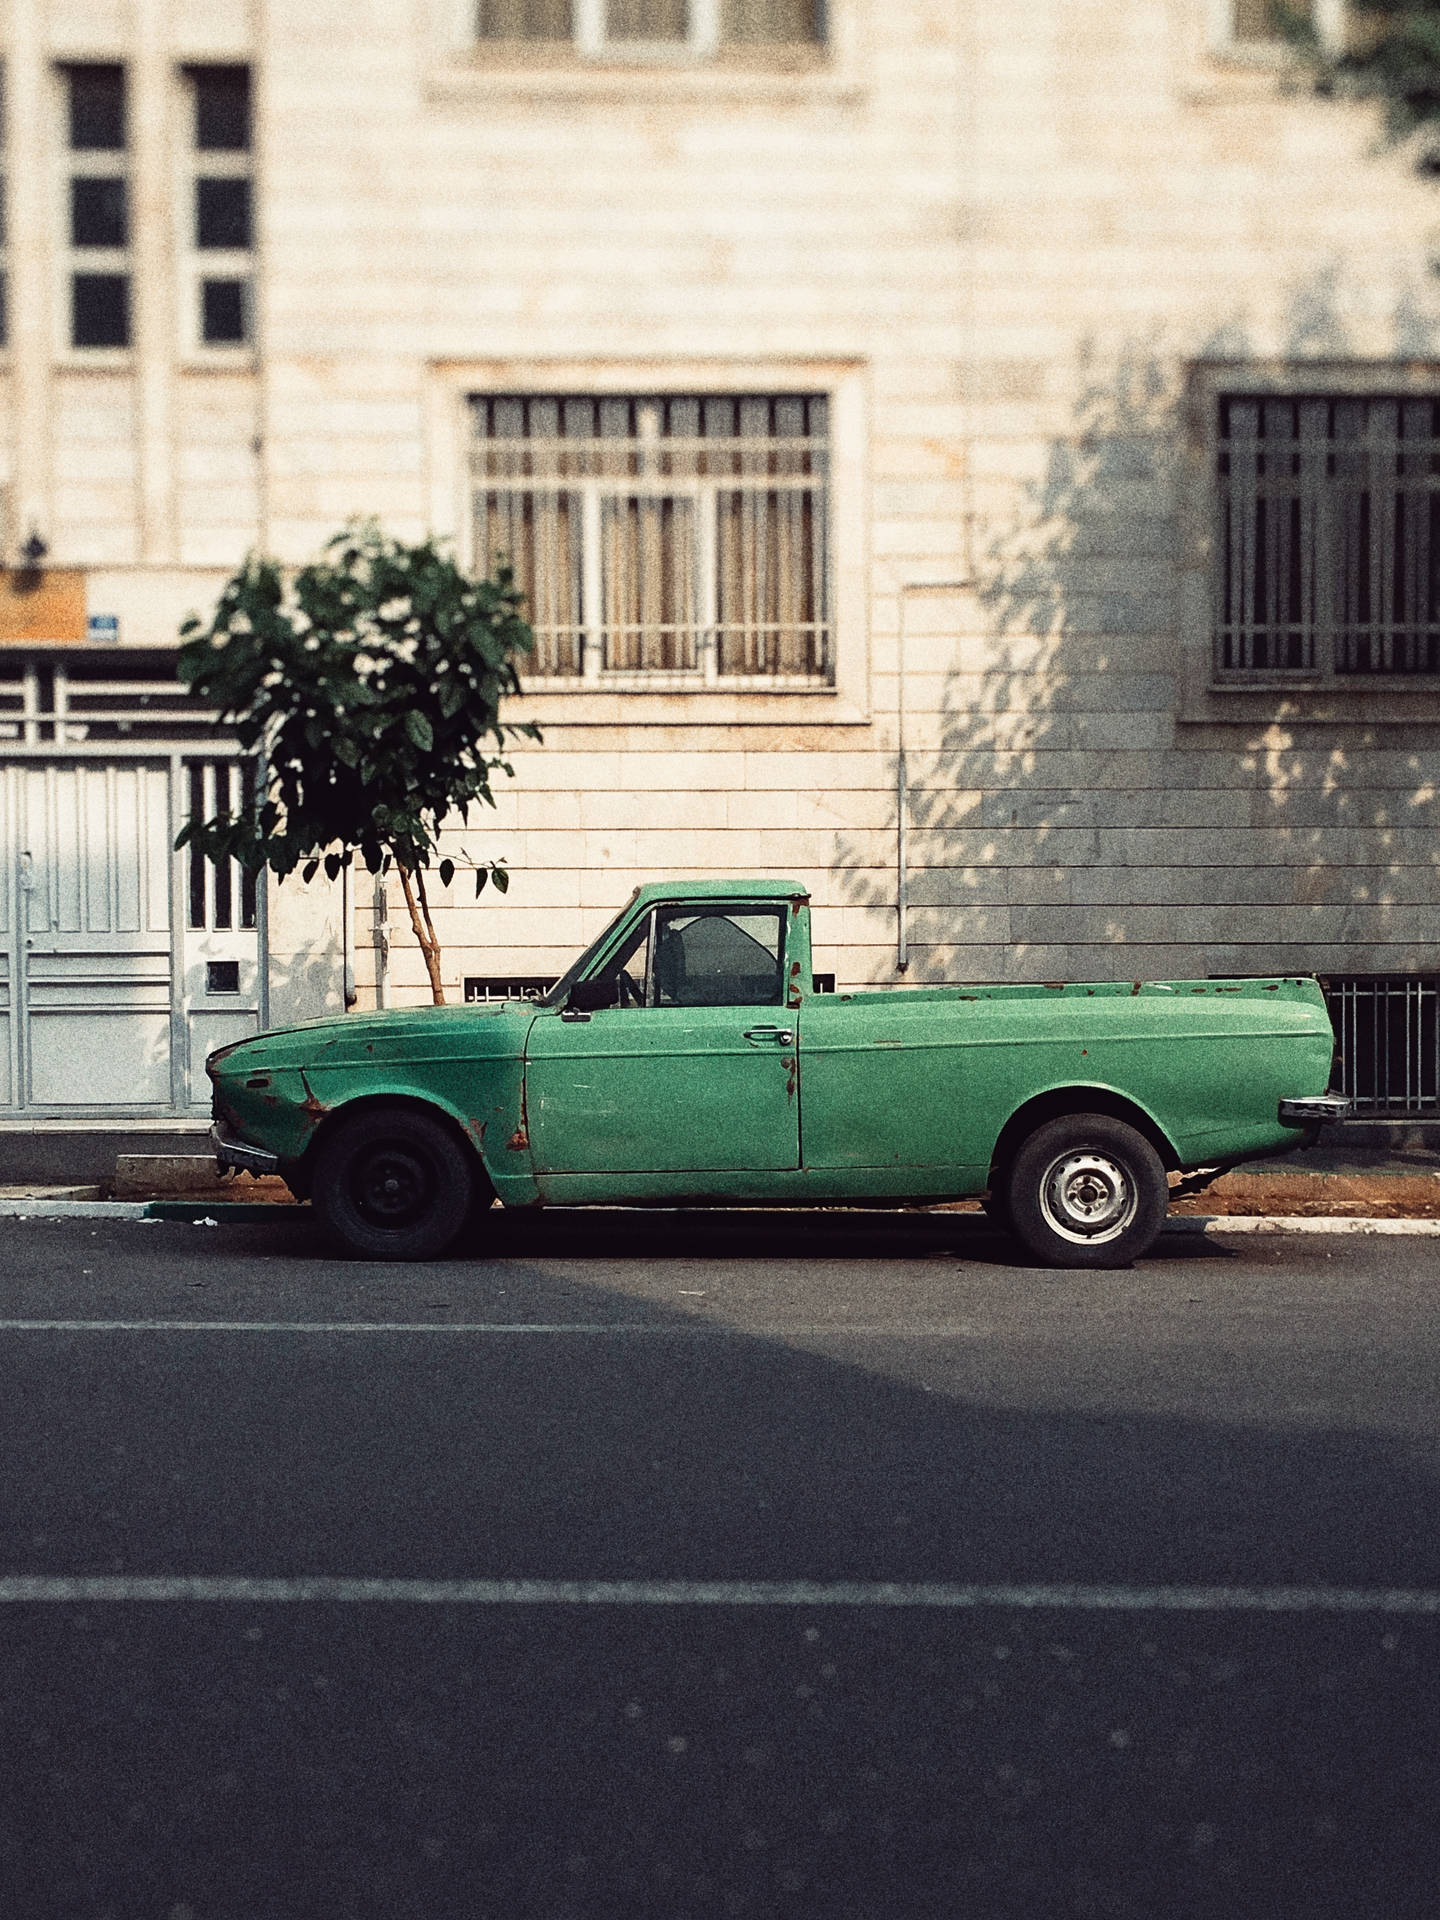 Green Car In The Street Background